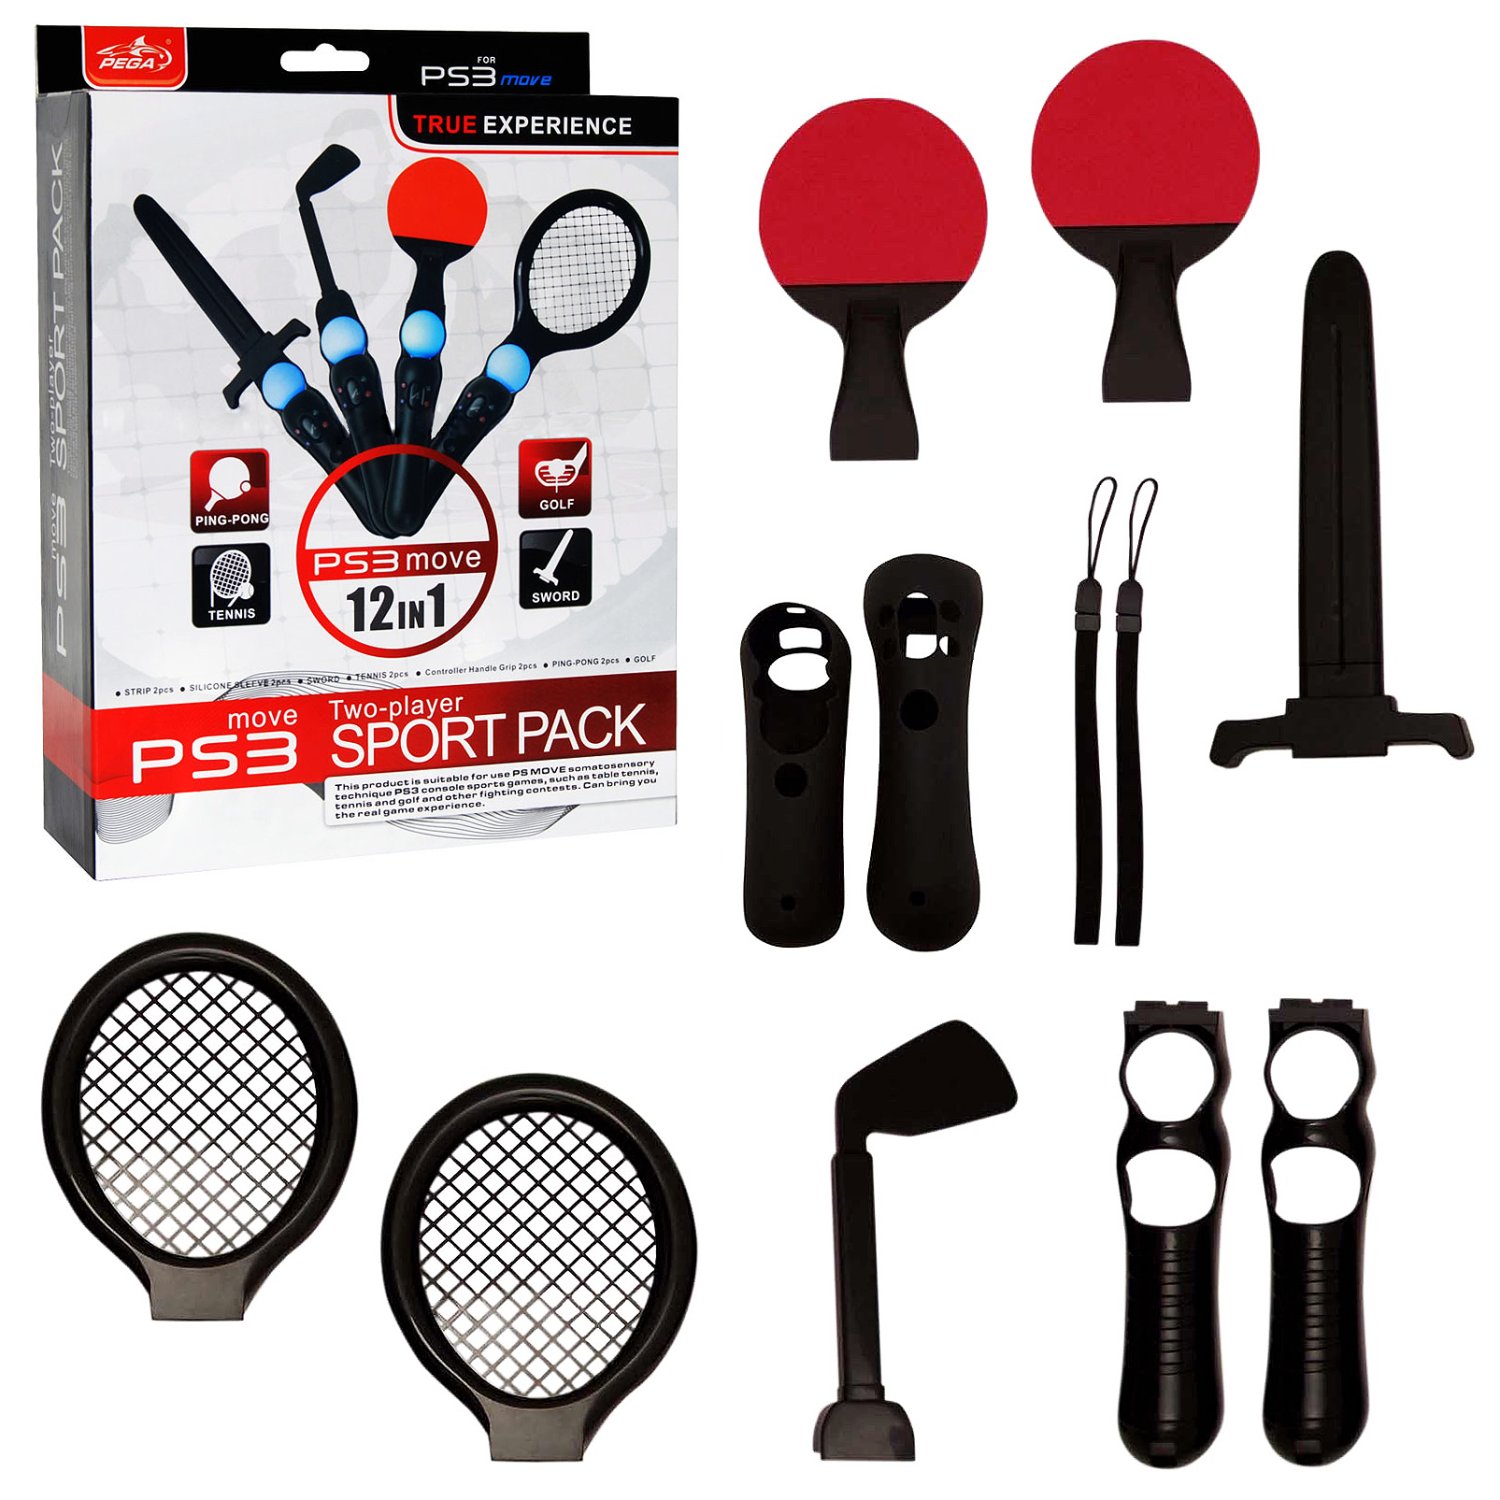 Pega PS3 Move Sports Pack 12 in 1